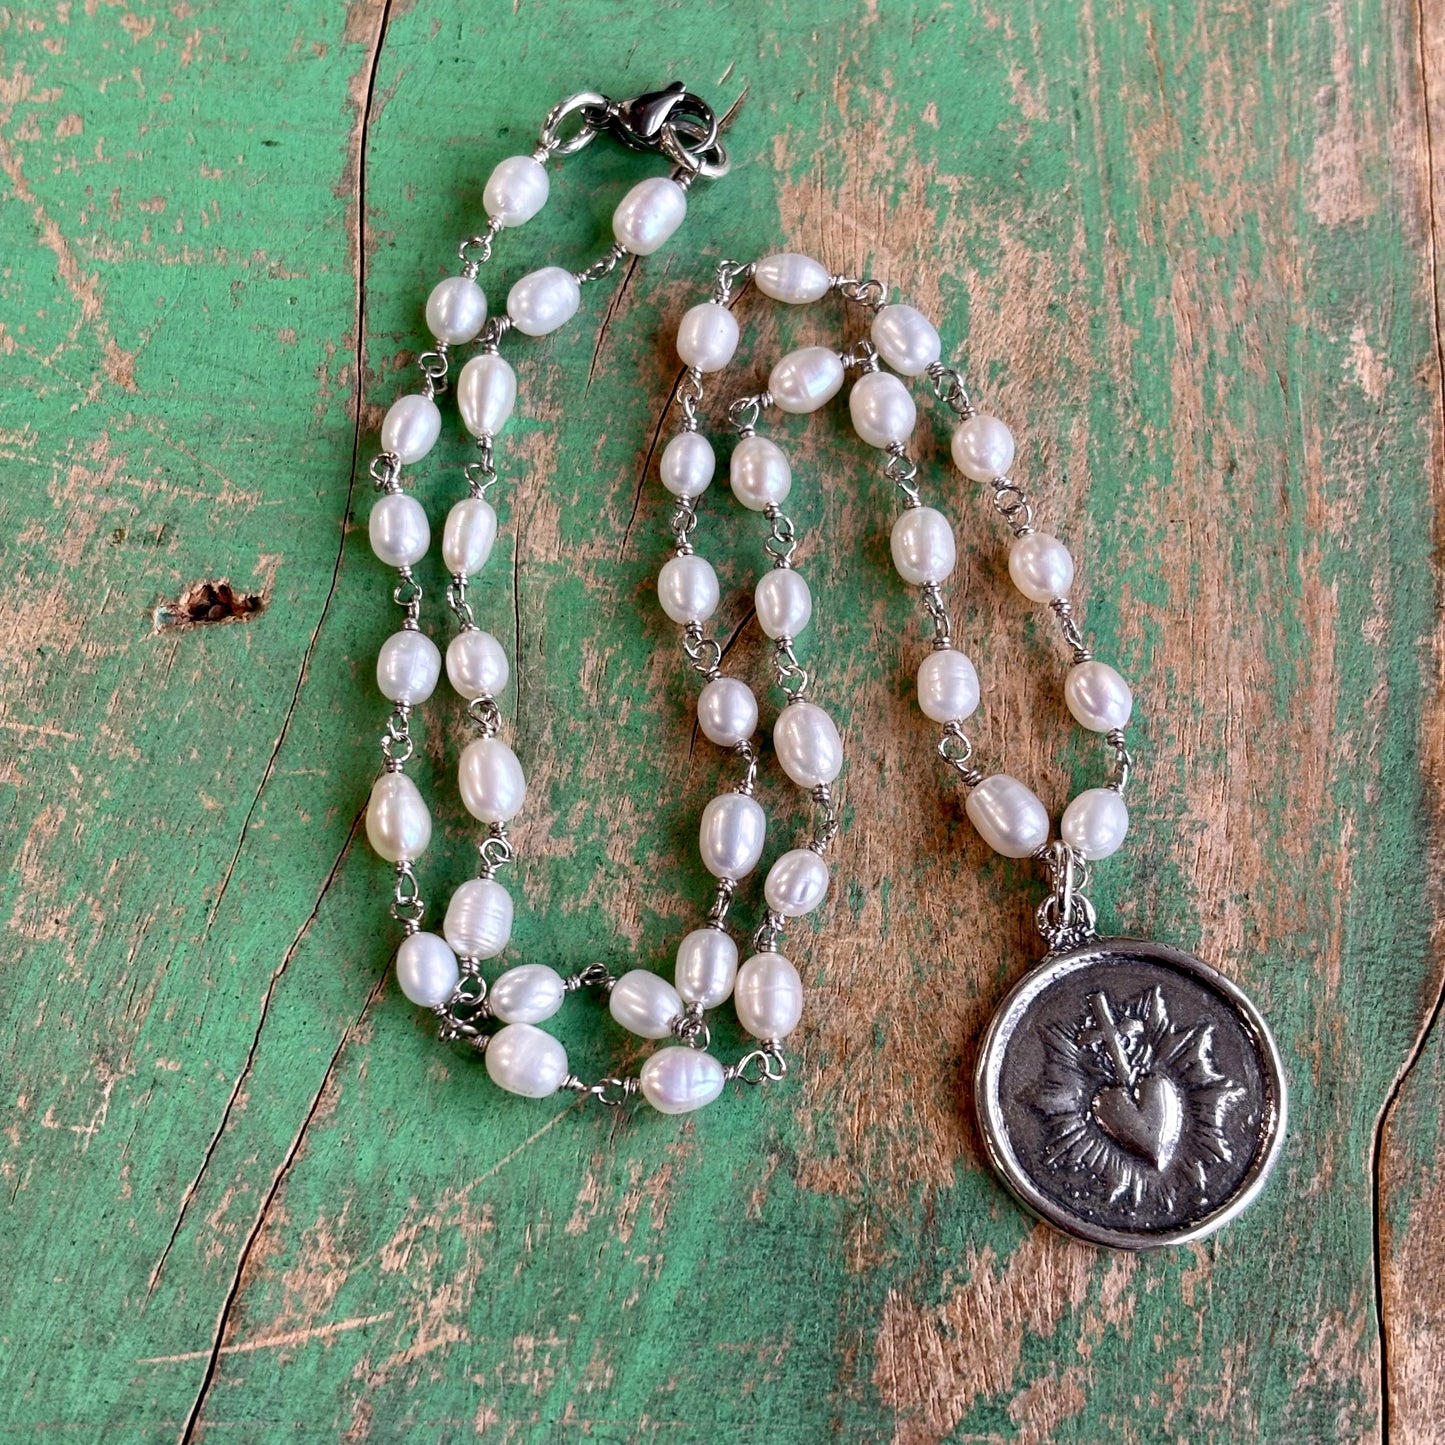 Sterling Silver Round Sacred Heart Medallion on Freshwater Pearls